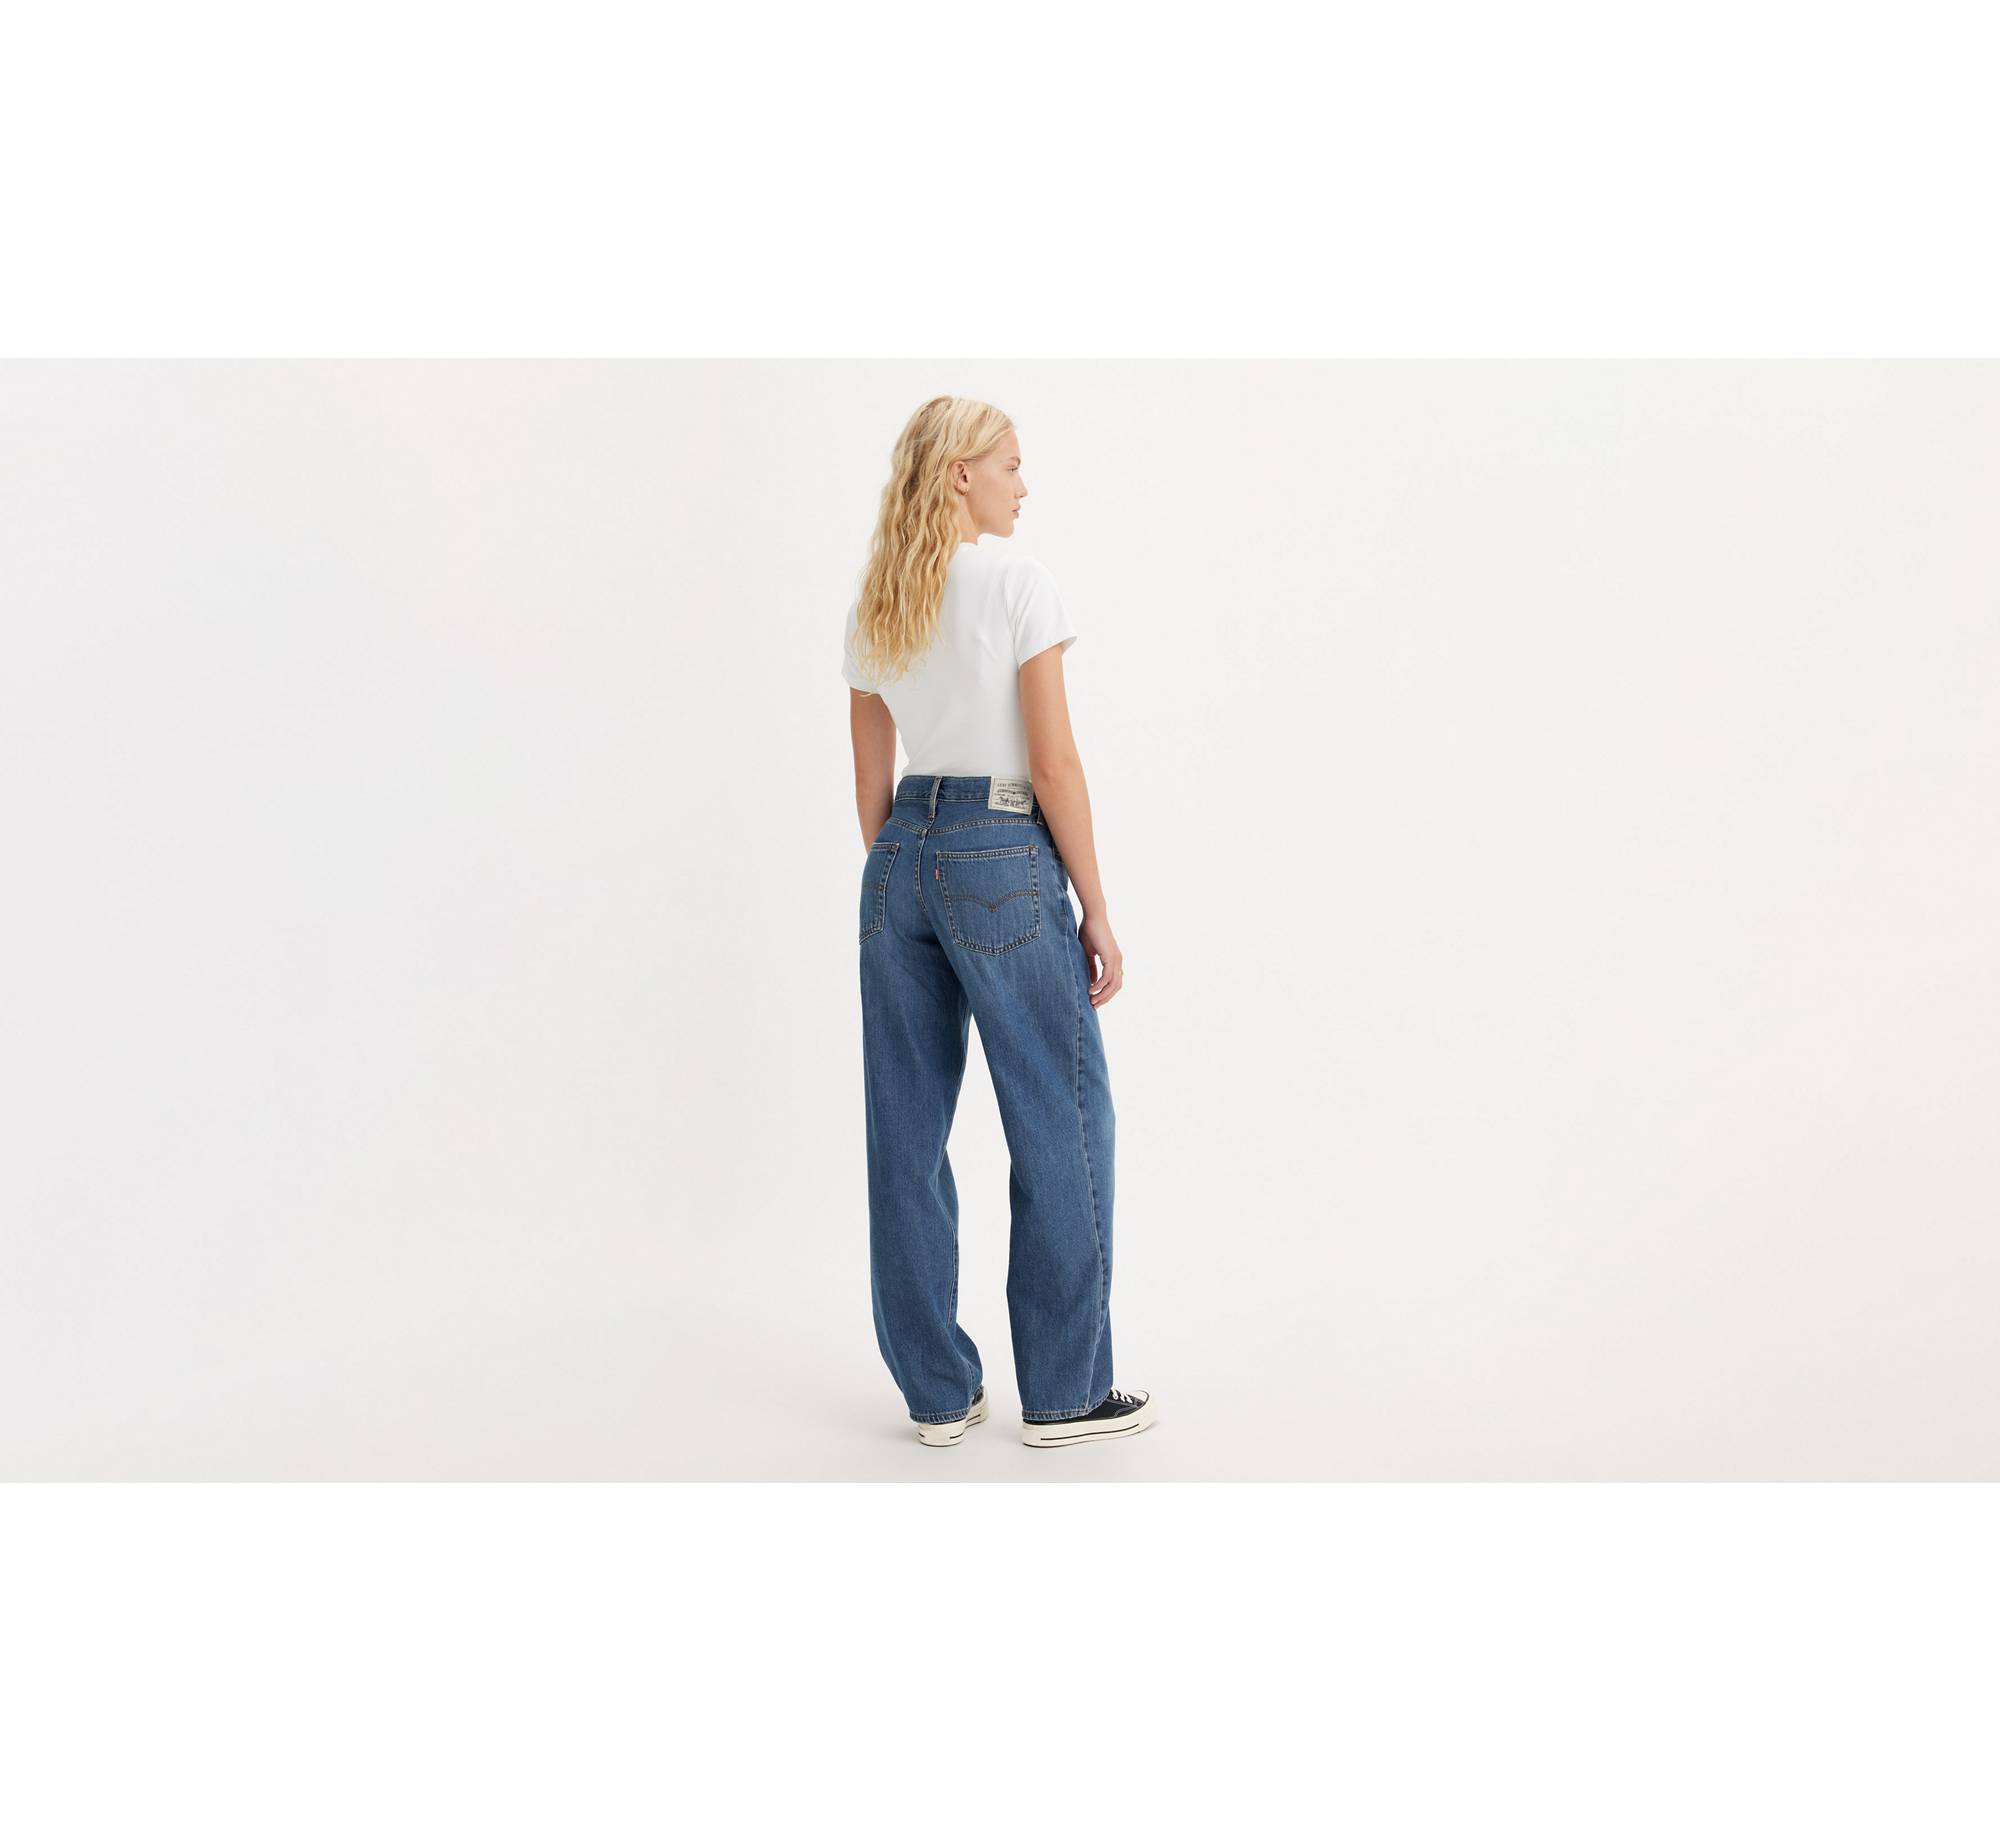 Baggy Dad Performance Cool Women's Jeans - Dark Wash | Levi's® US